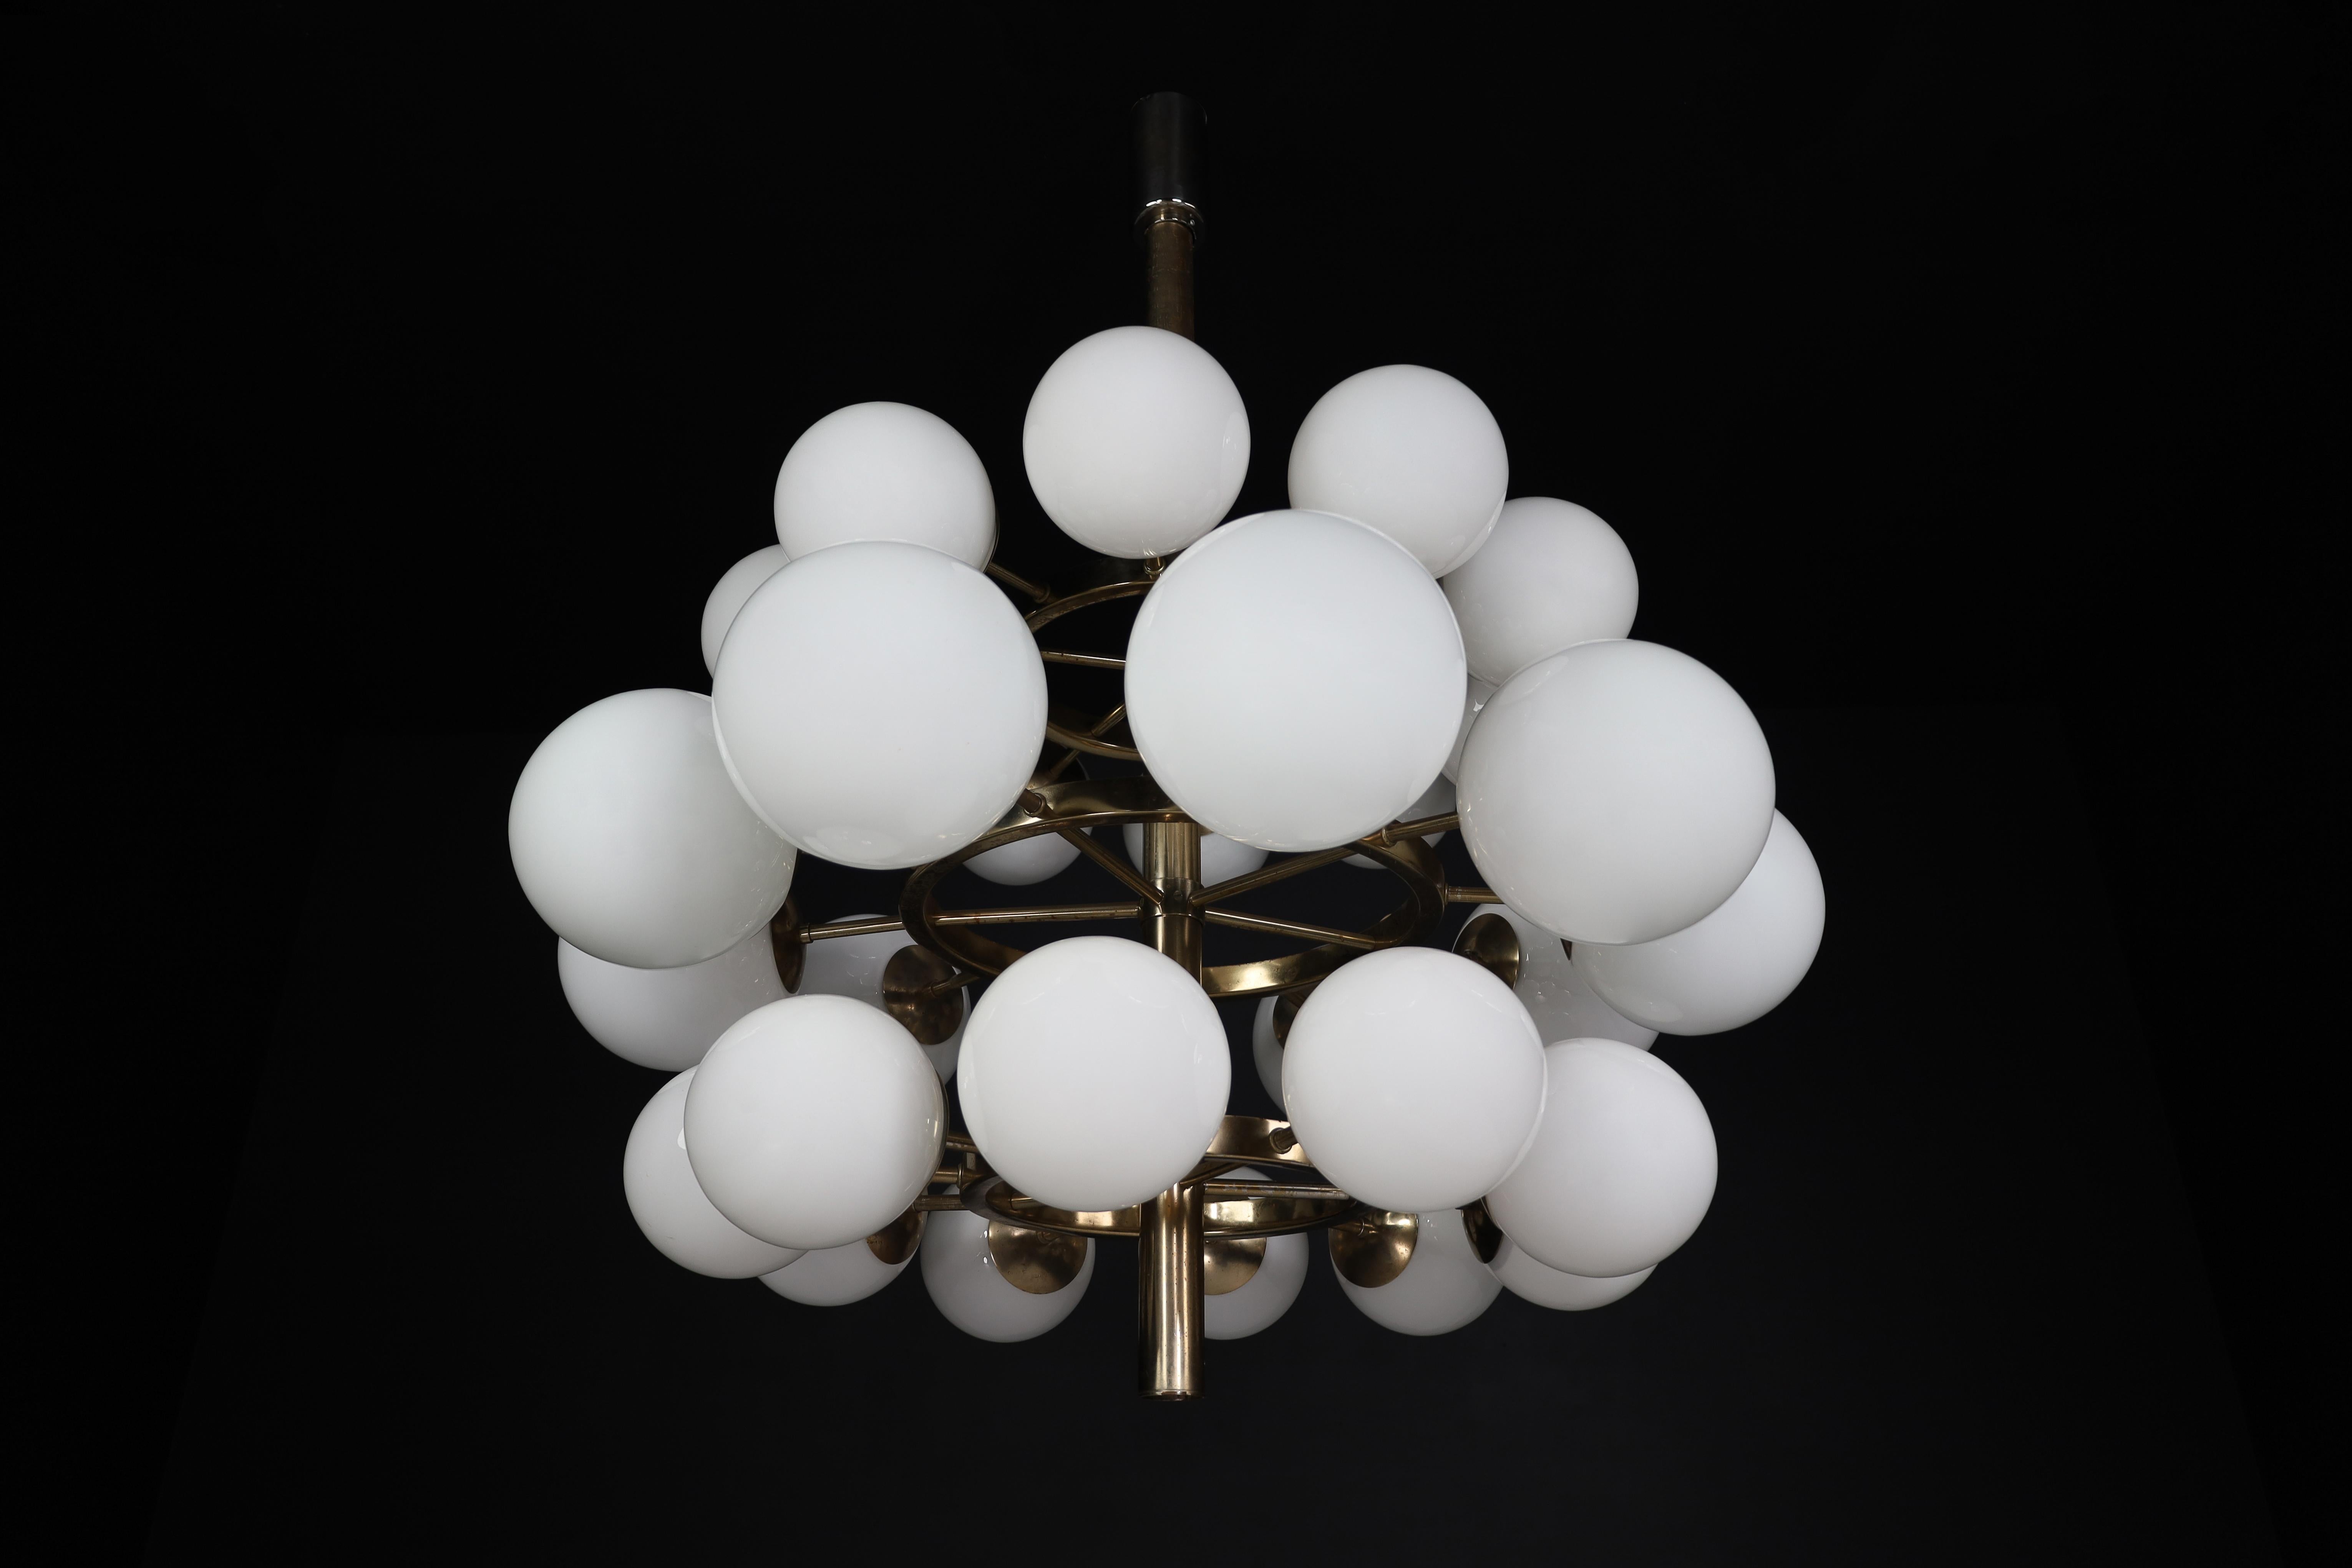 A midcentury modernist large chandelier with 30 handblown opaline glass globes. The fixture is made of metal with a chrome-brass patina. Therefore an attractive color is visible on the metal. Thirty opaline glass globes are placed over three levels.